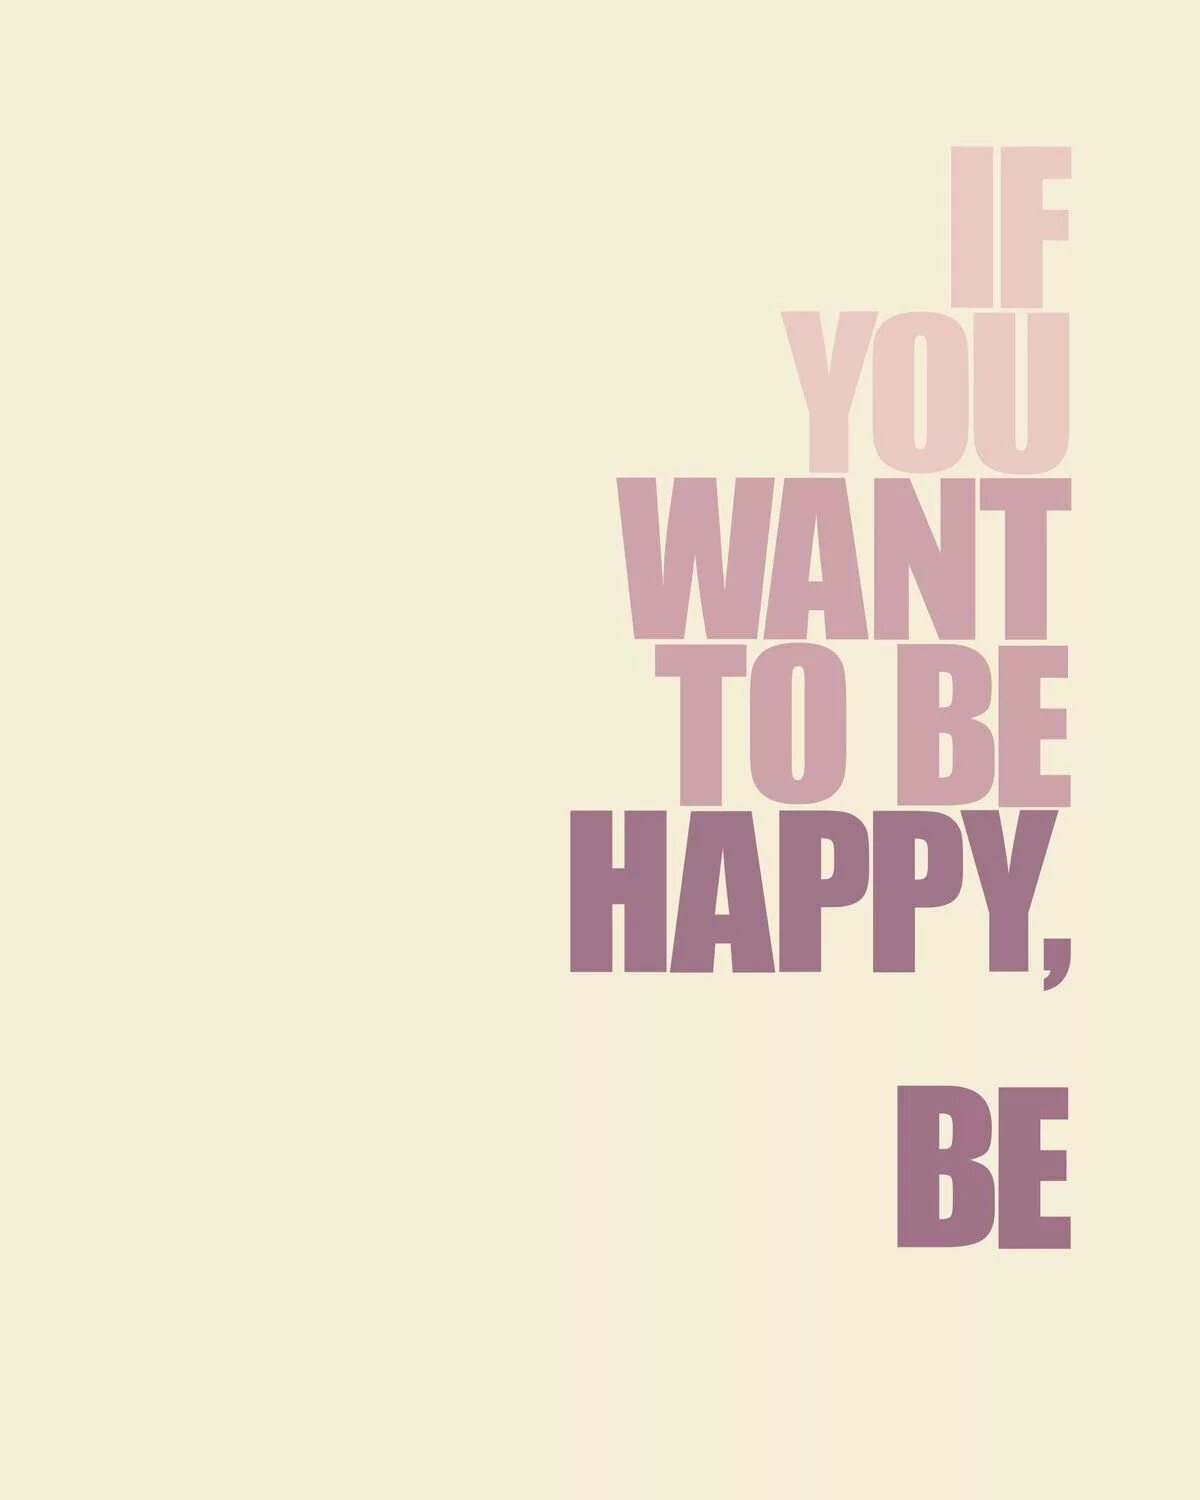 If you want to be Happy be. Be Happy. Цитаты be Happy be. I want to be Happy картинки. O be happy